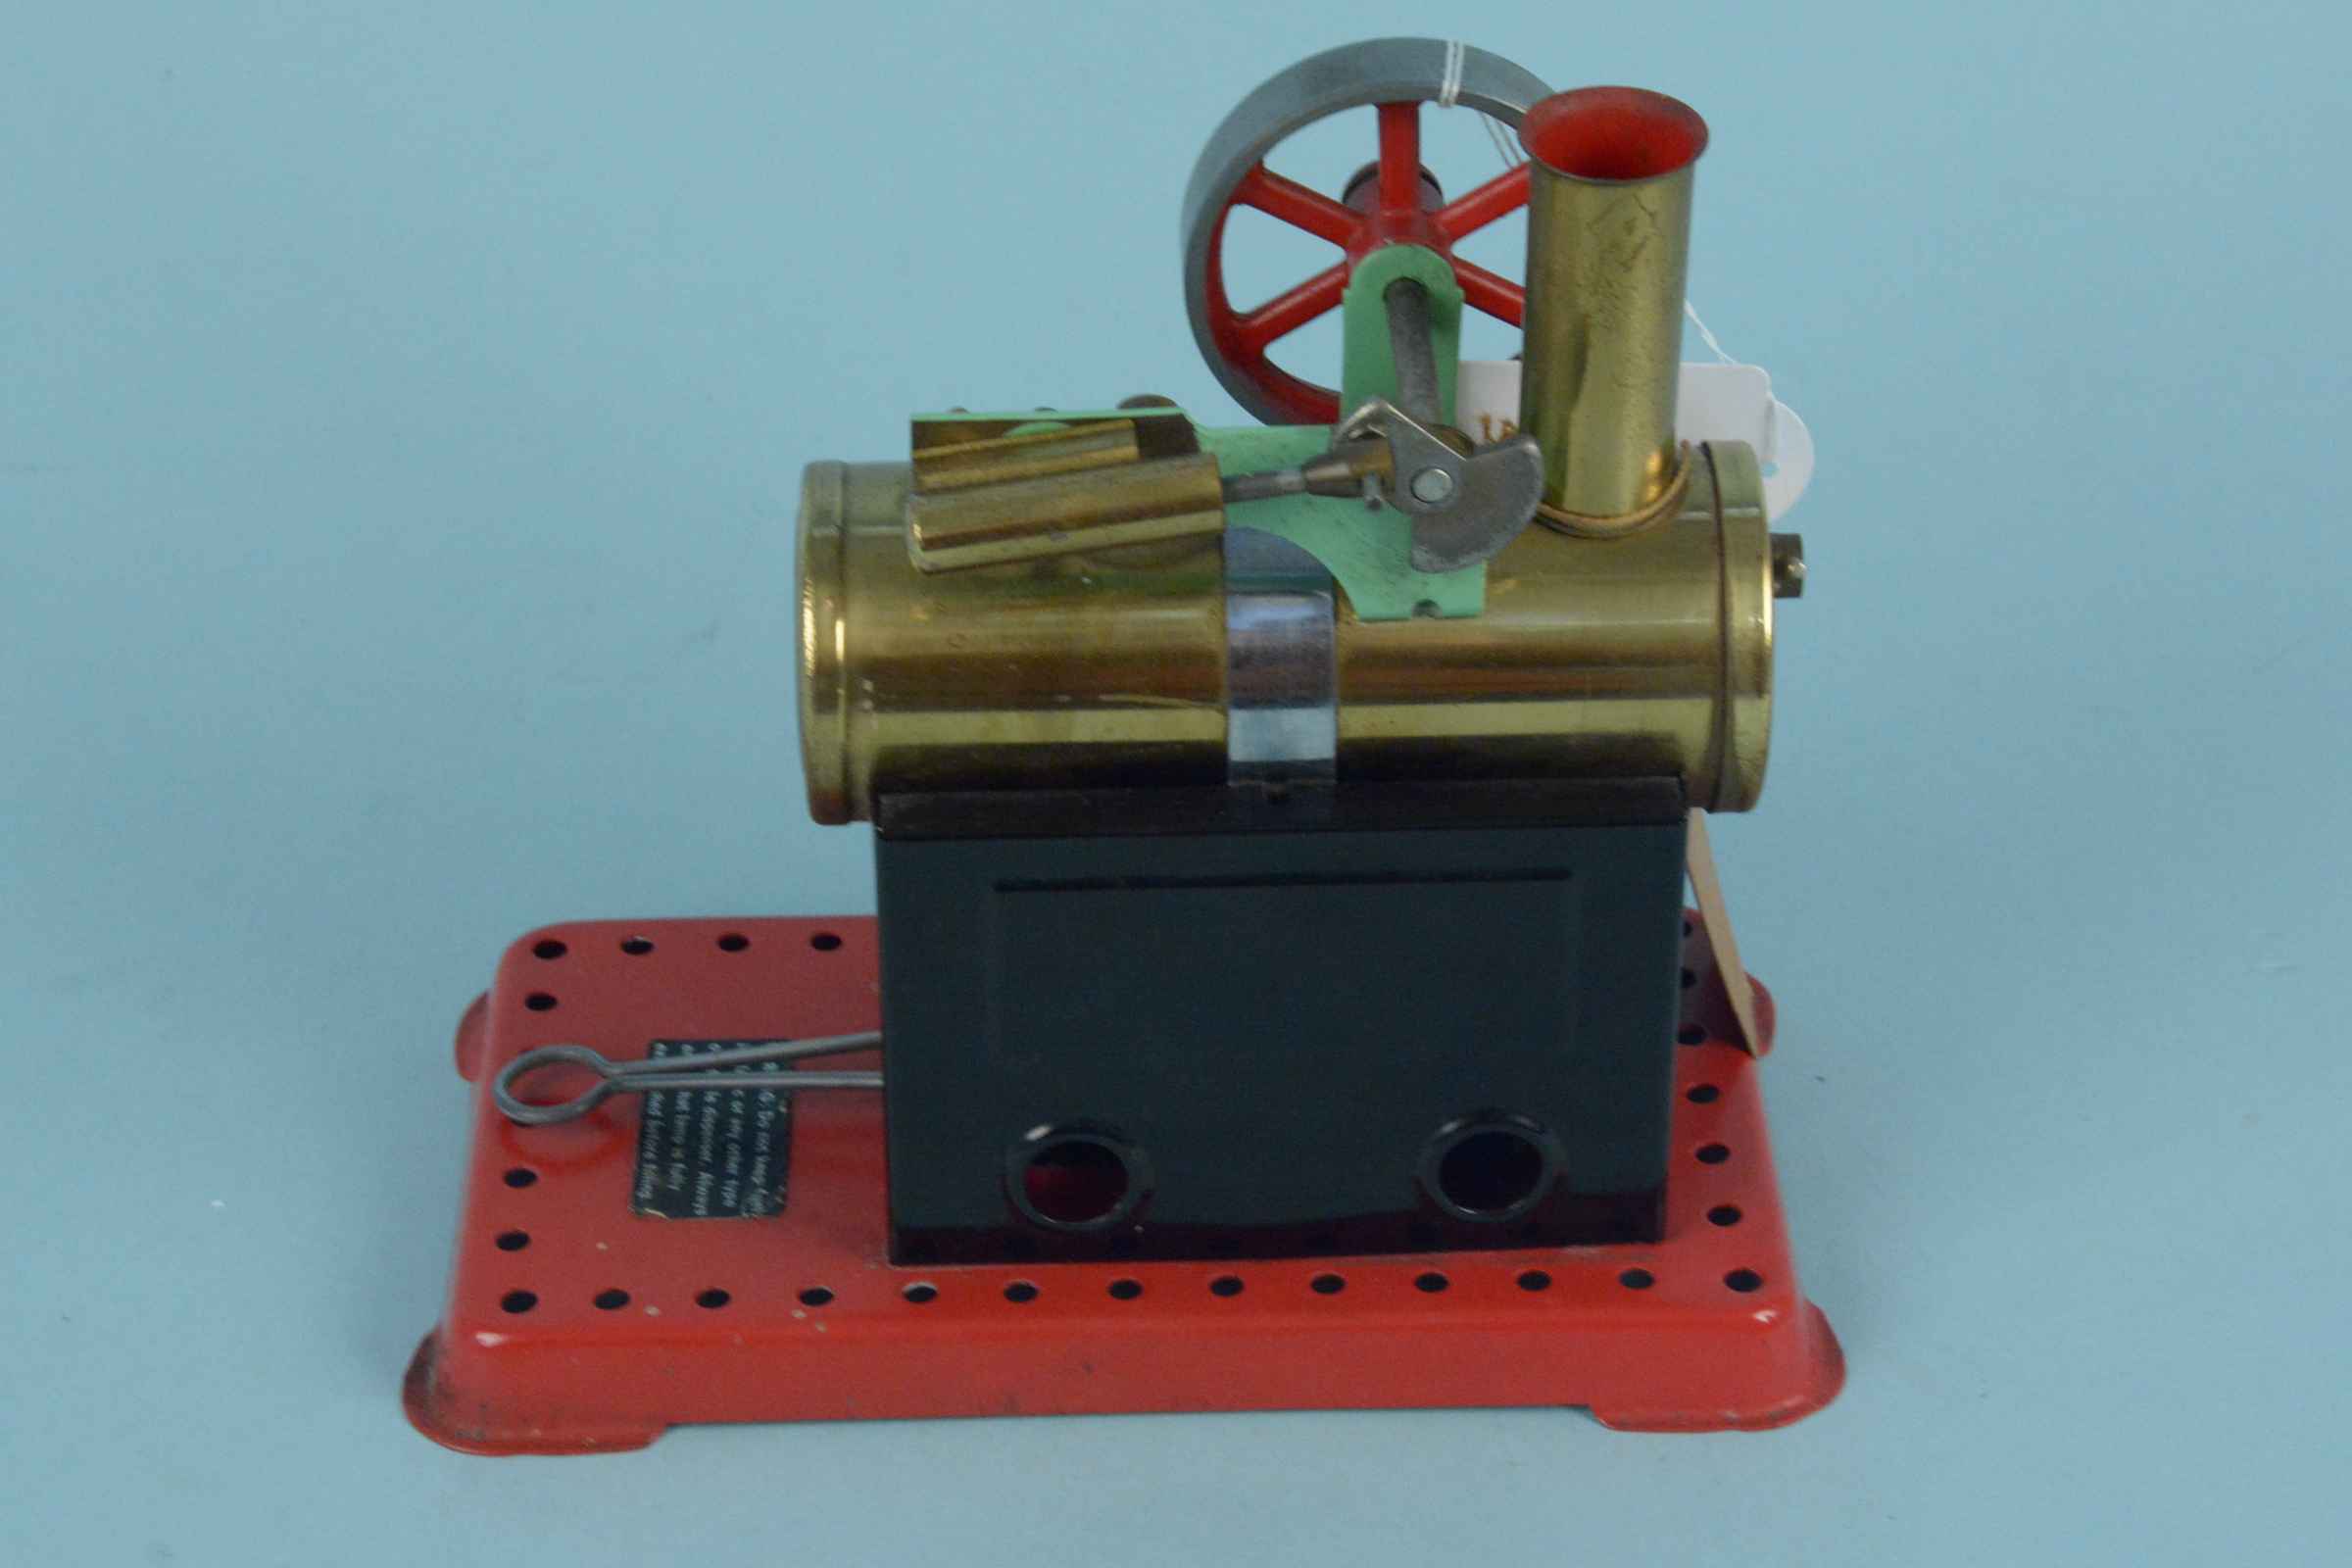 A Mamod SP2 steam engine with burner, - Image 2 of 3